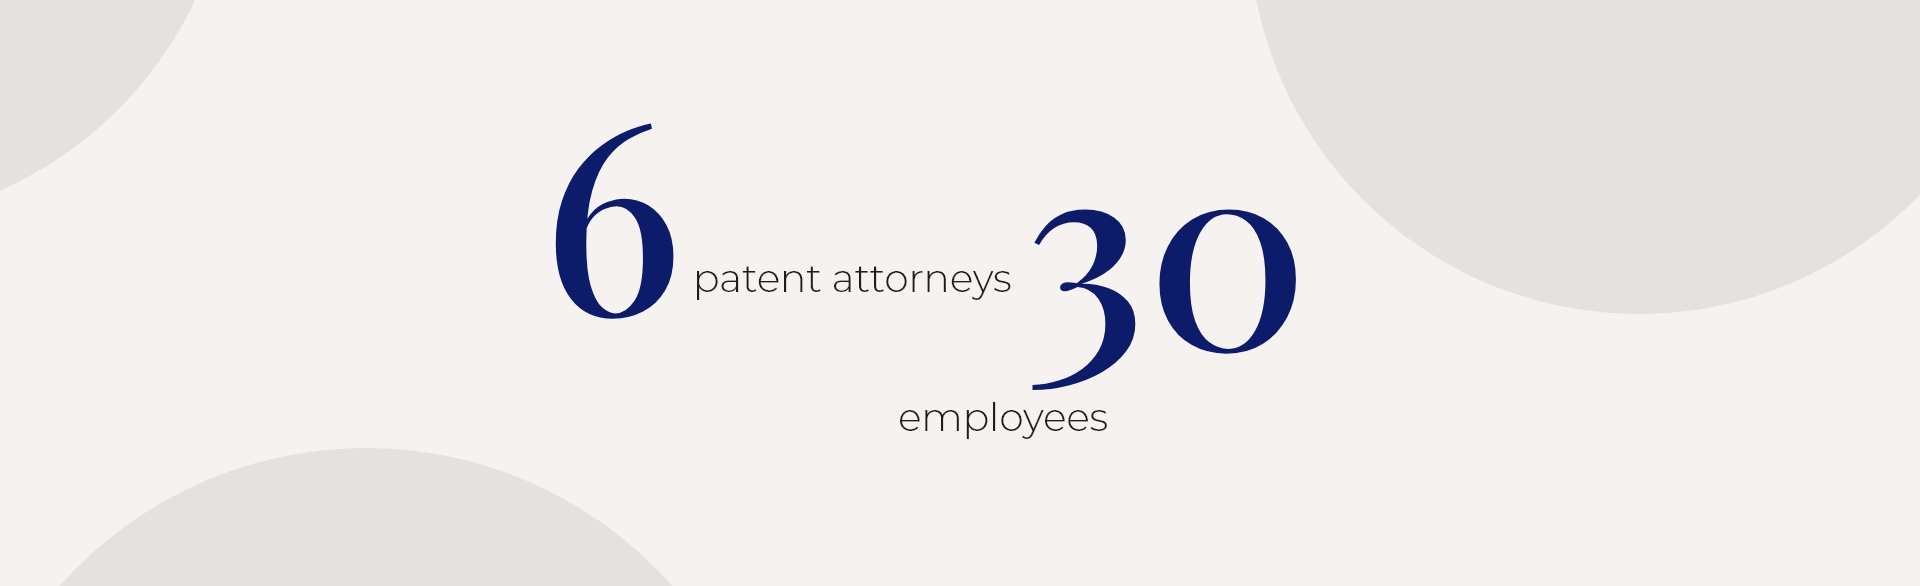 6 patent attorneys, 30 employees